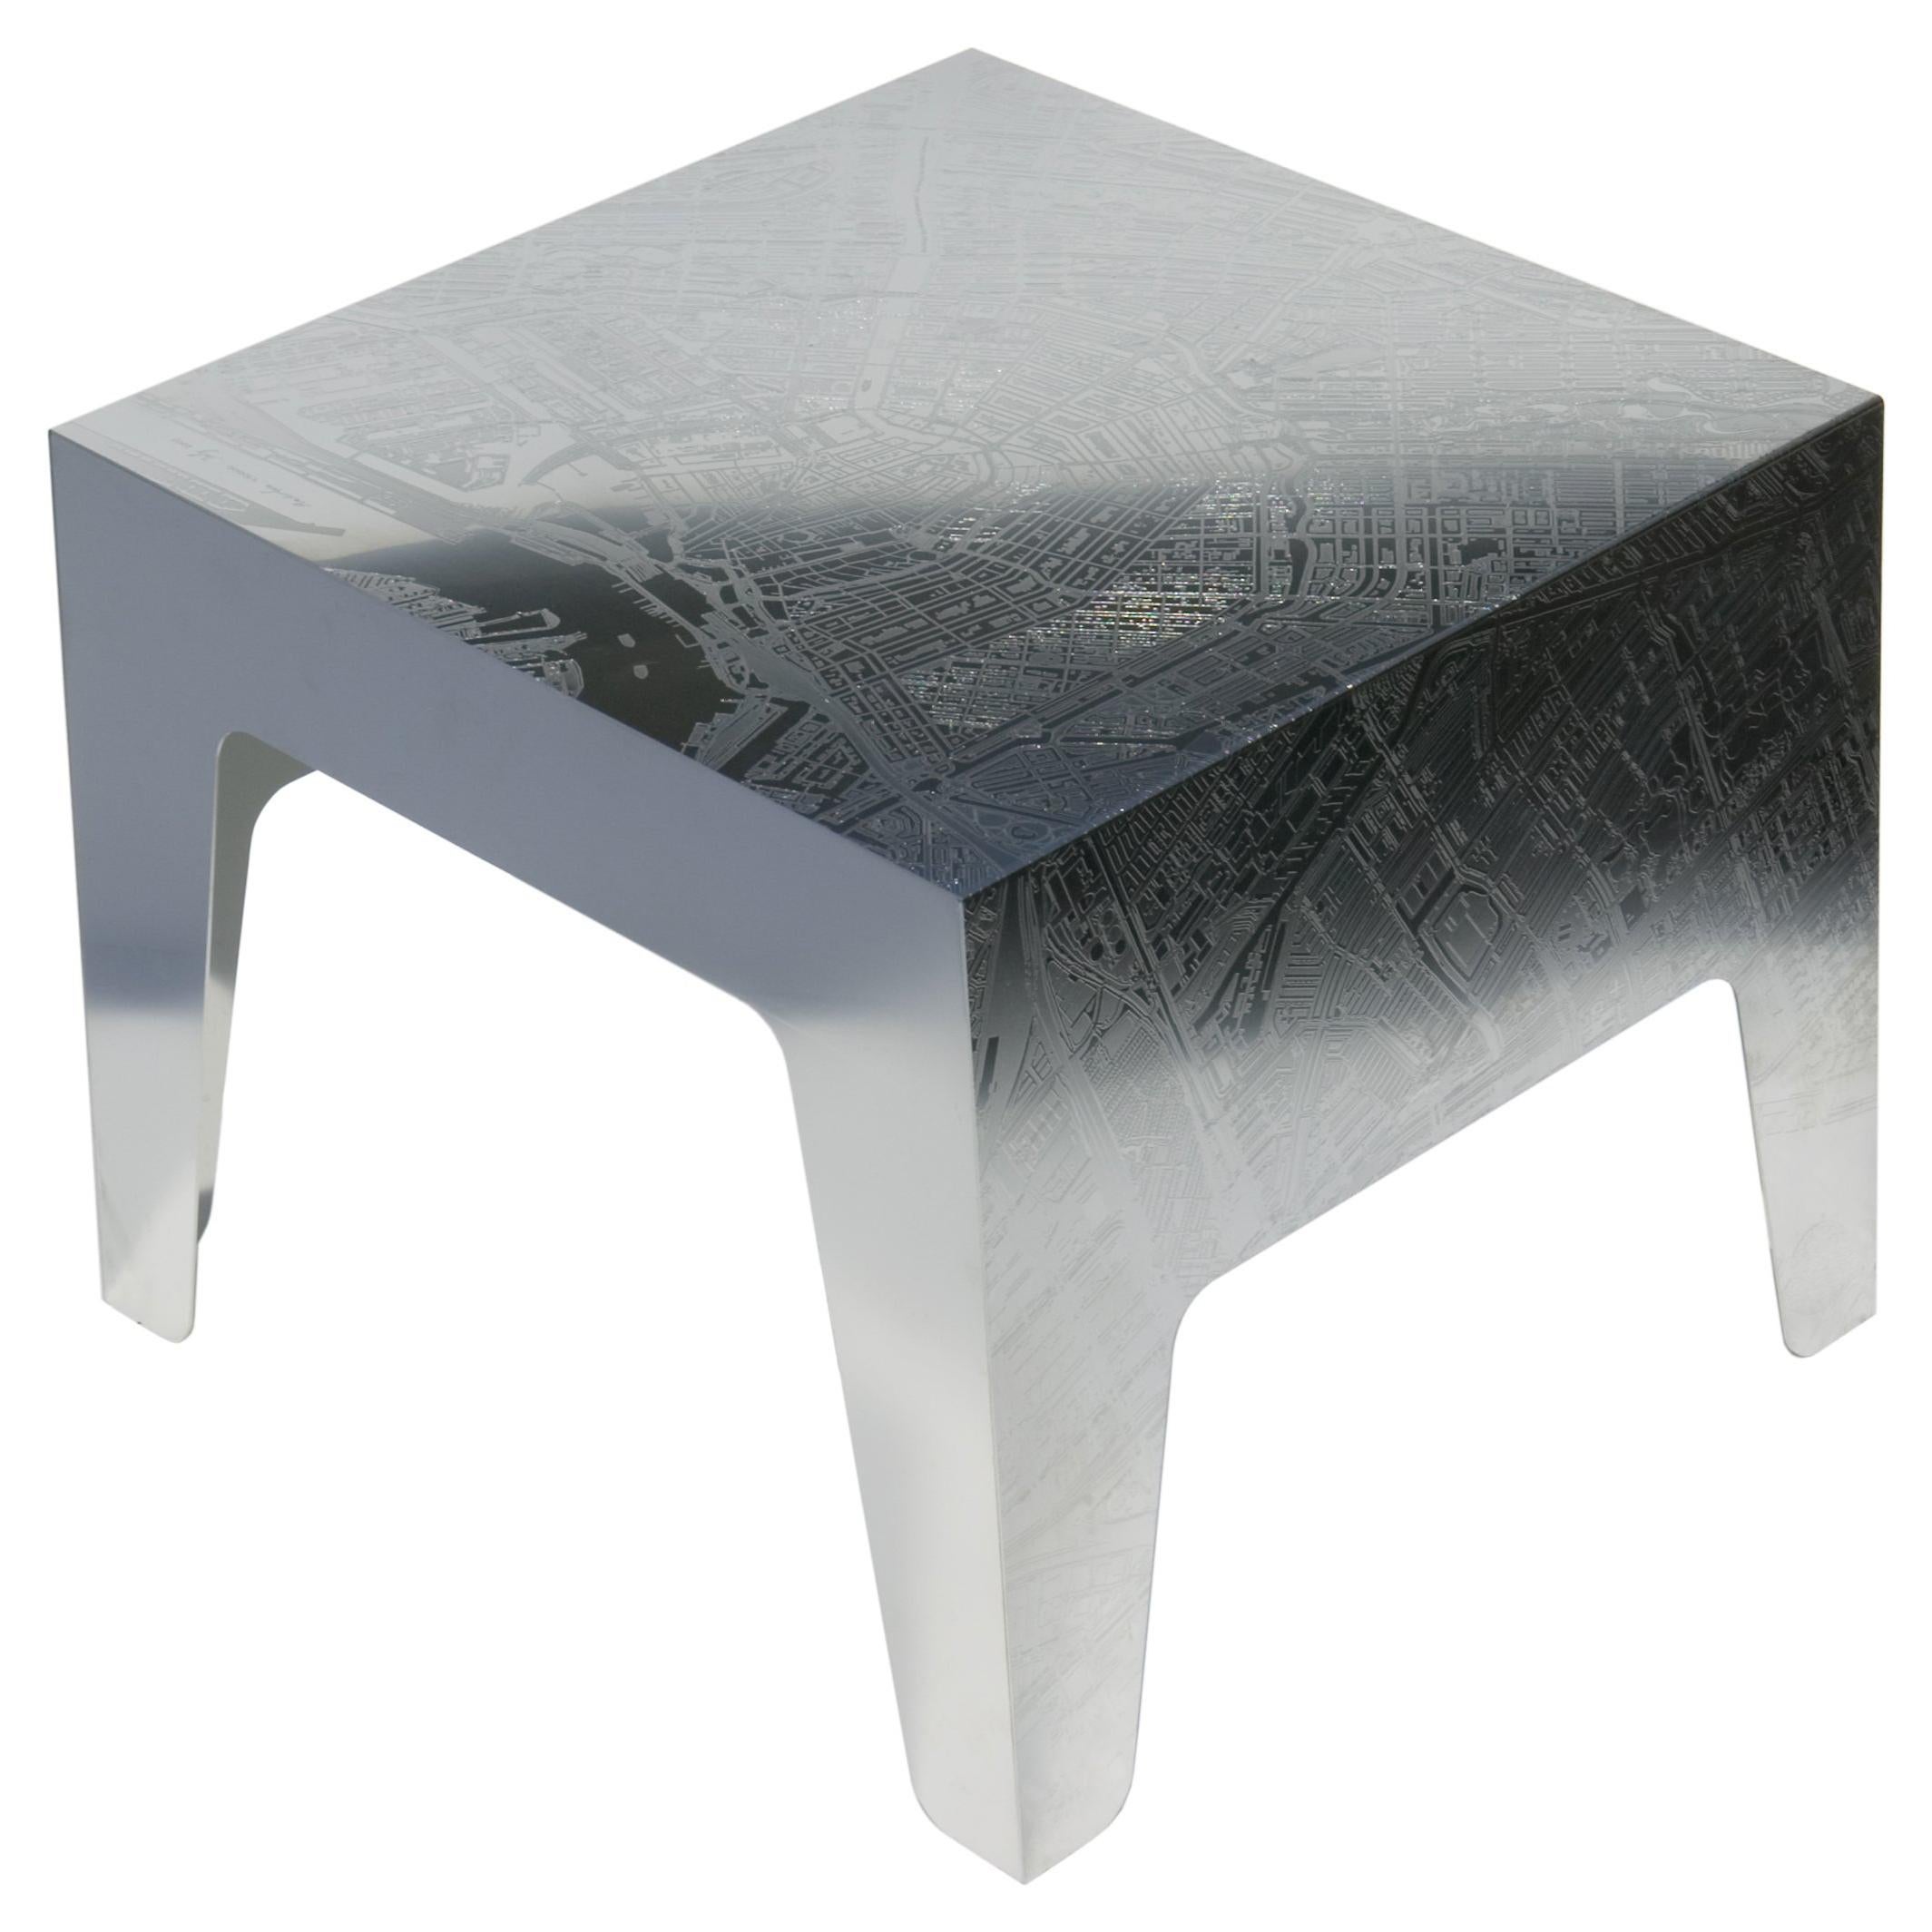 Amsterdam Table, by Marcel Wanders, Etched Stainless Steel, 2000, #2/5